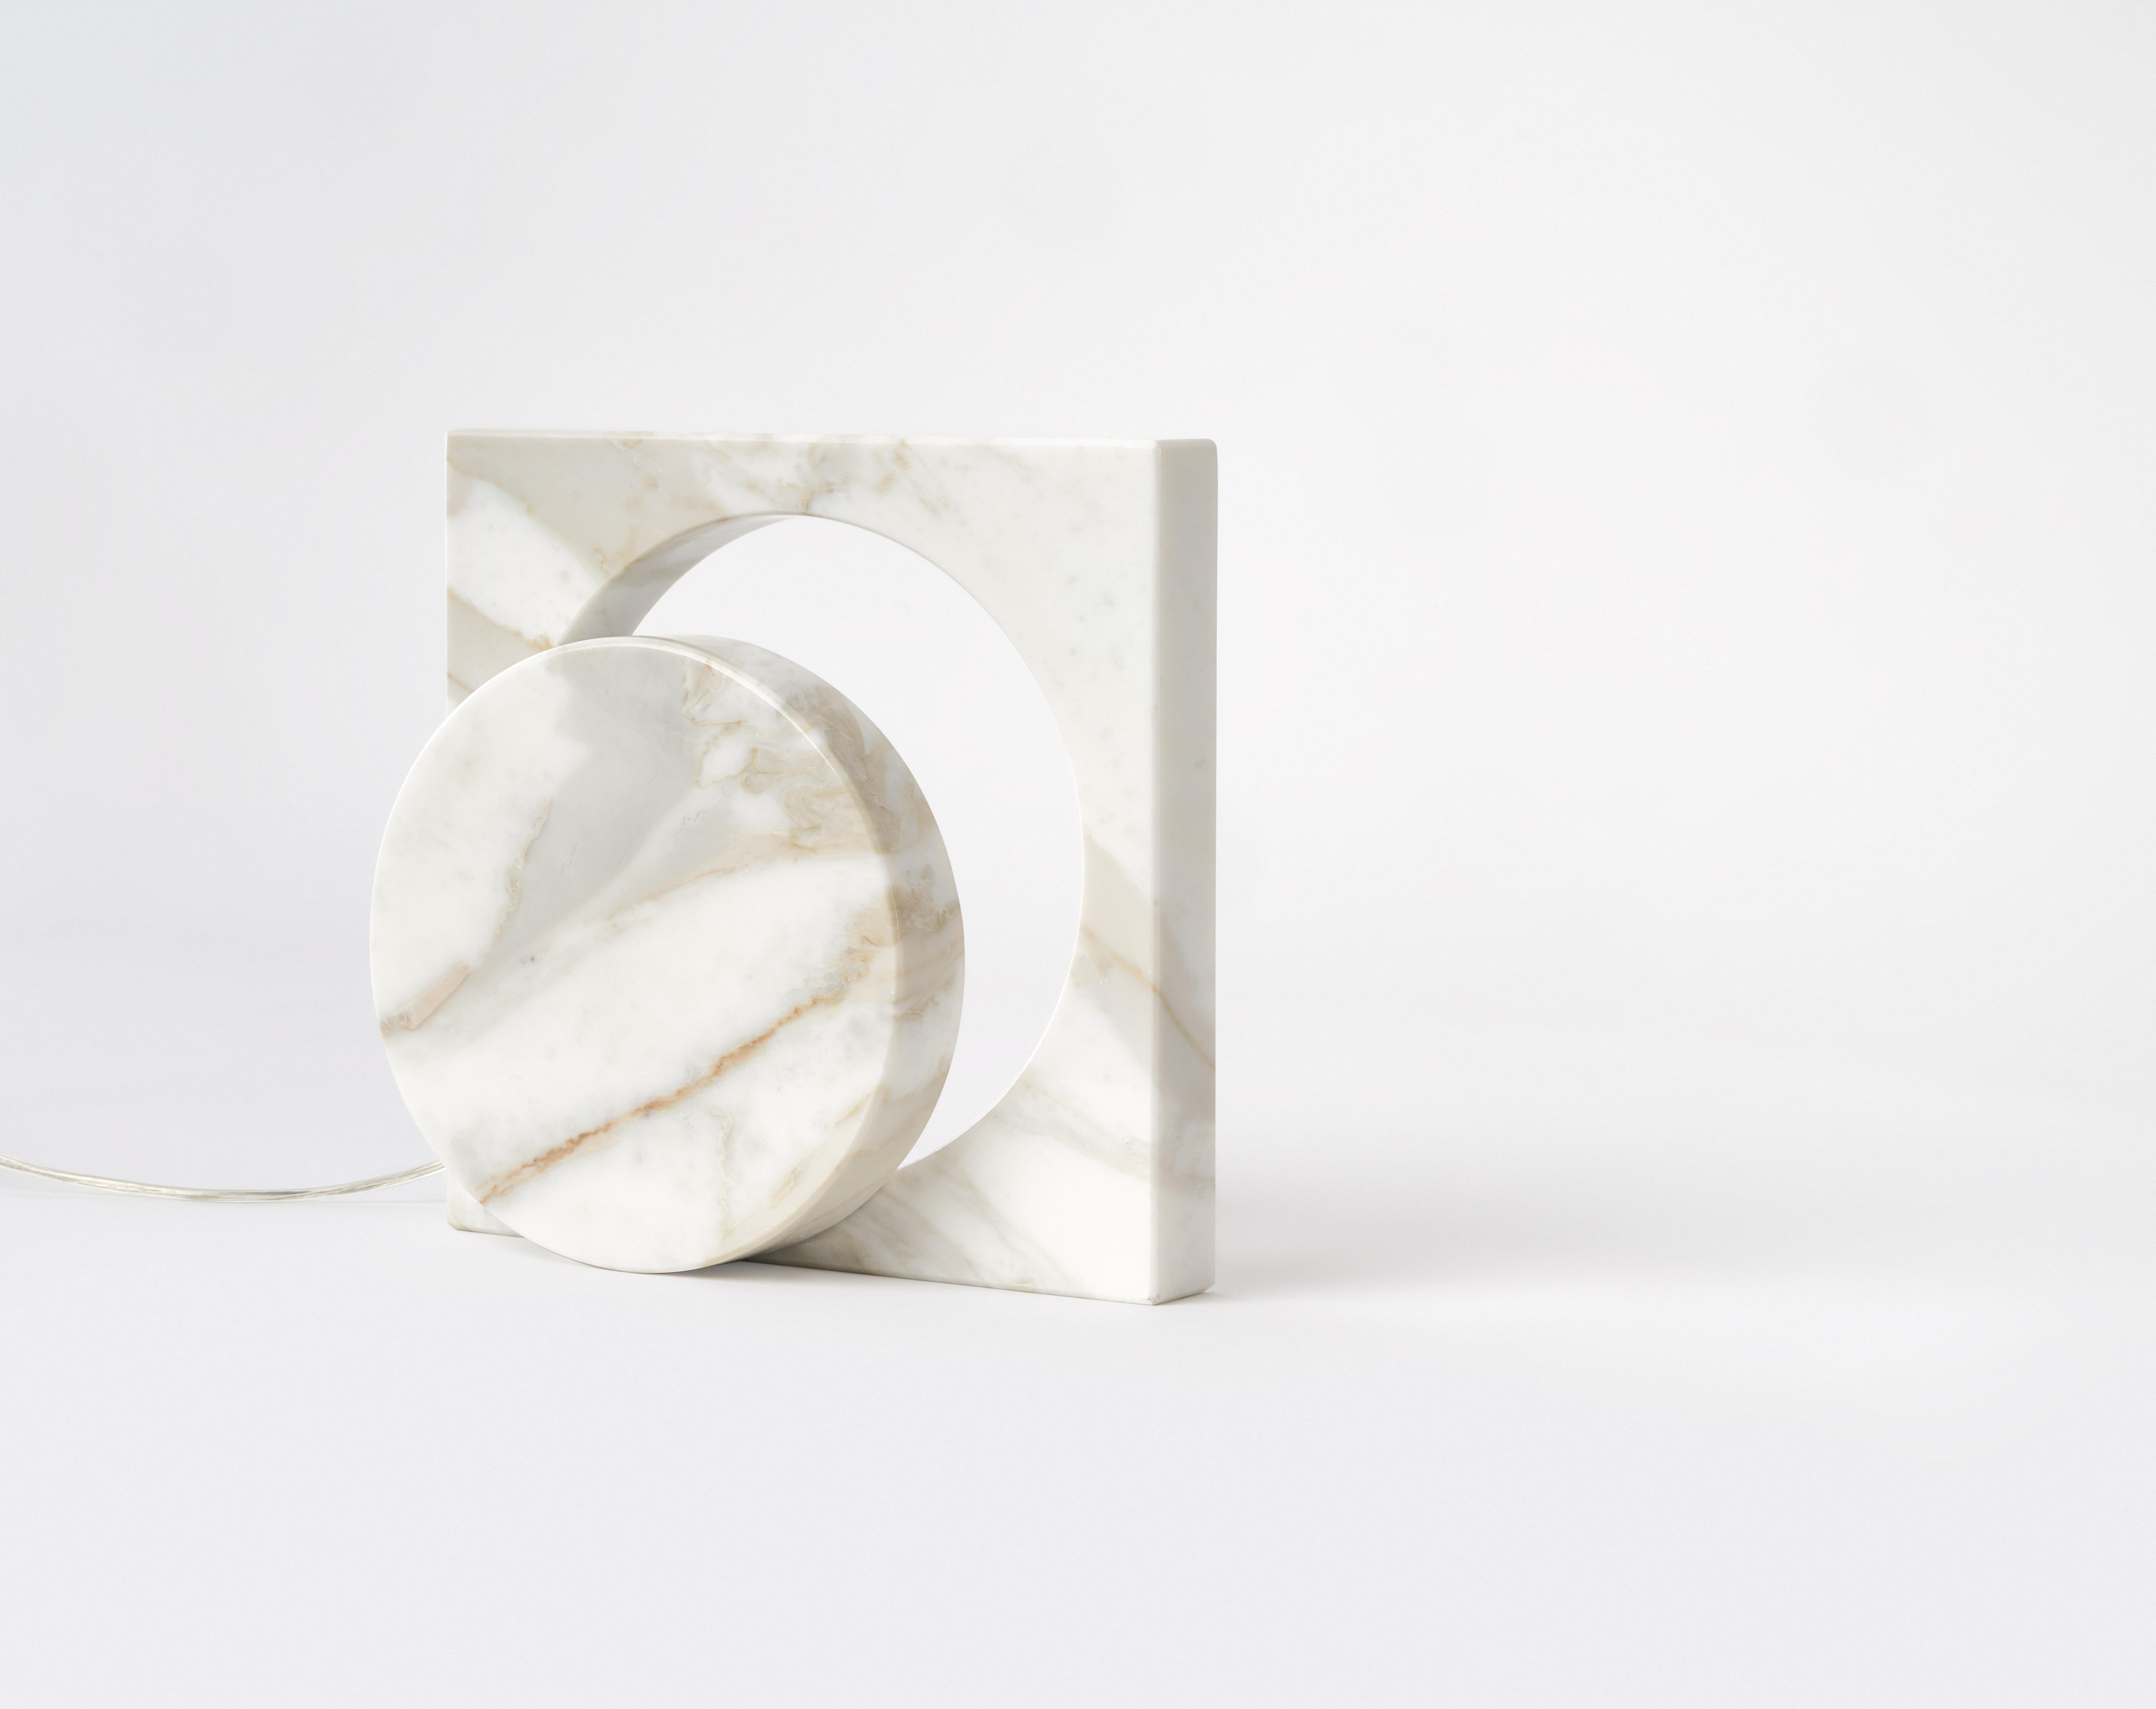 Marble One Cut Moon table lamp- Moreno Ratti
Dimensions: D 9 x W 20 x H 20 cm
Materials: Calcata Oro marble.

All our lamps can be wired according to each country. If sold to the USA it will be wired for the USA for instance.

The idea of this